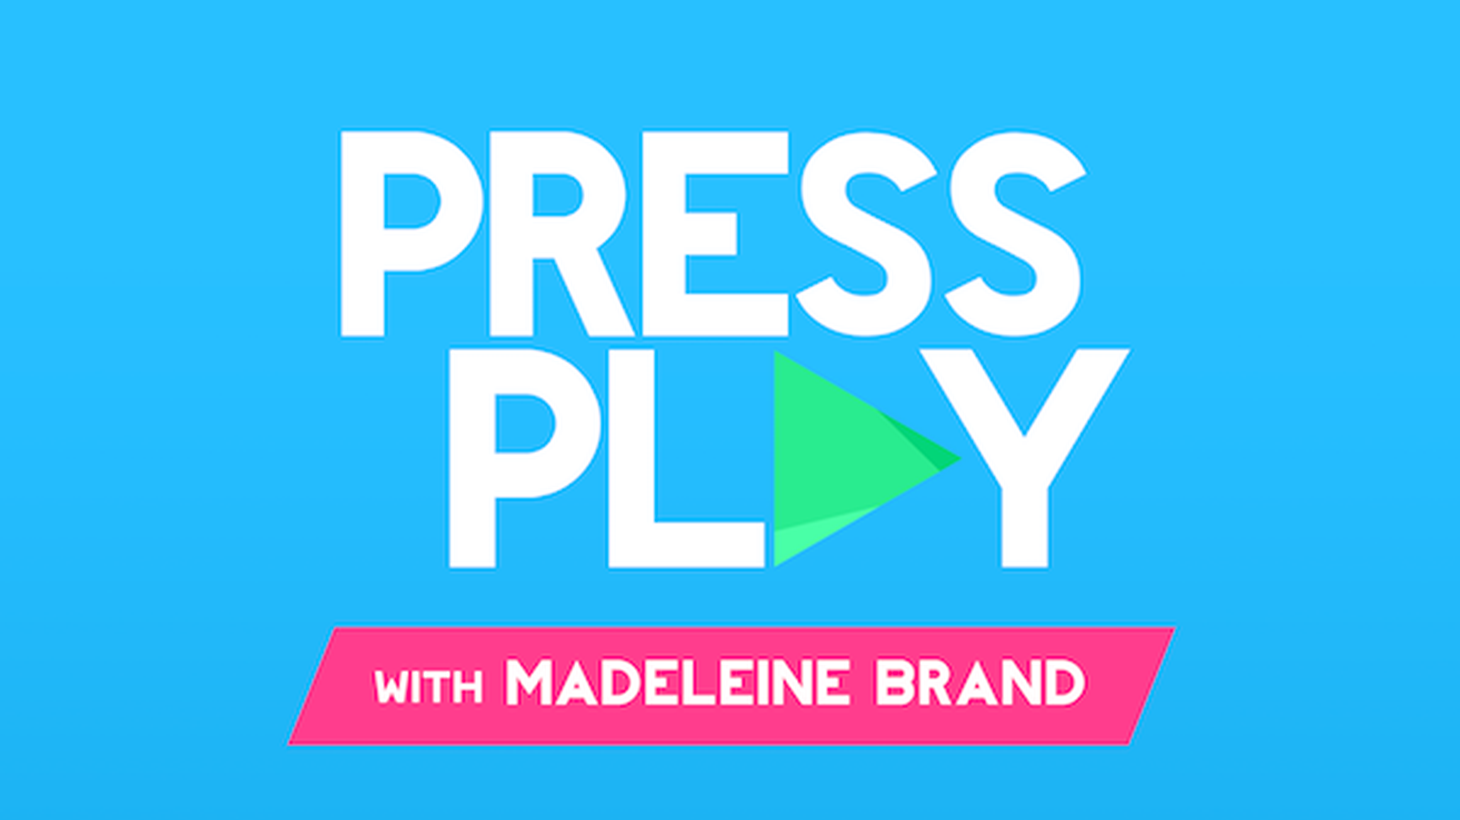 Free agency is a common term in sports circles. Now, it's becoming part of the conversation in the world of ballet as well. Today on Press Play, we discuss that, and we look at what happened when Rhode Island accidentally legalized prostitution for six years.